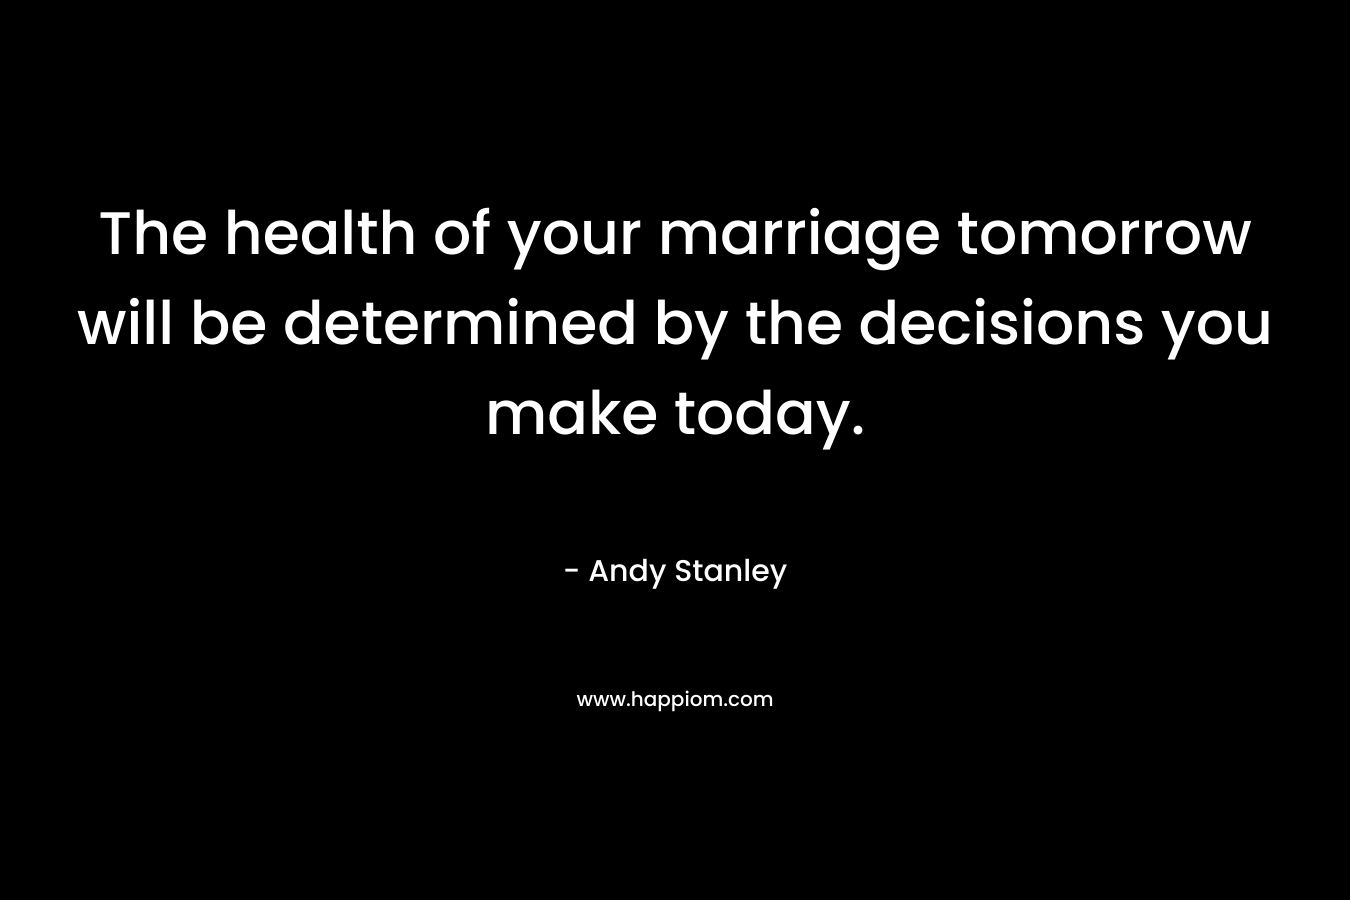 The health of your marriage tomorrow will be determined by the decisions you make today. – Andy Stanley